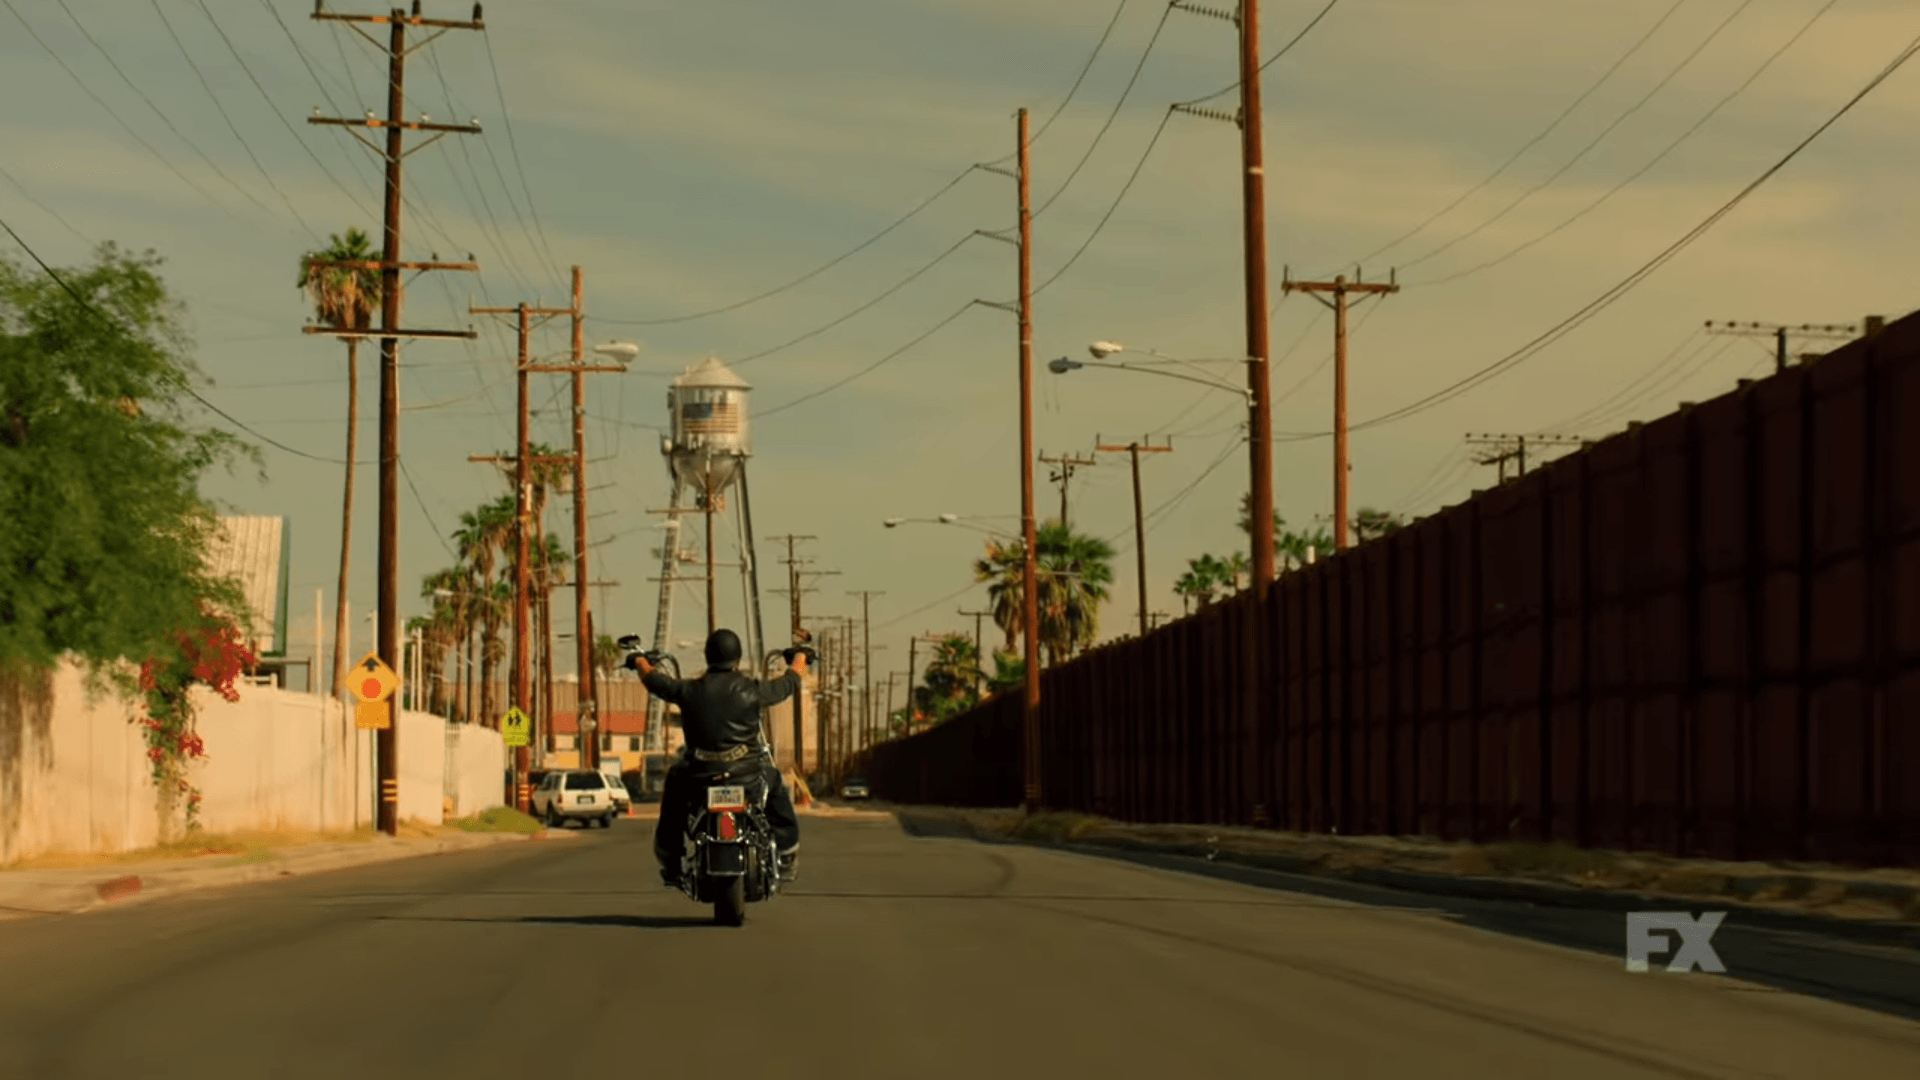 Watch New for 'Sons of Anarchy' Spinoff 'Mayans M.C